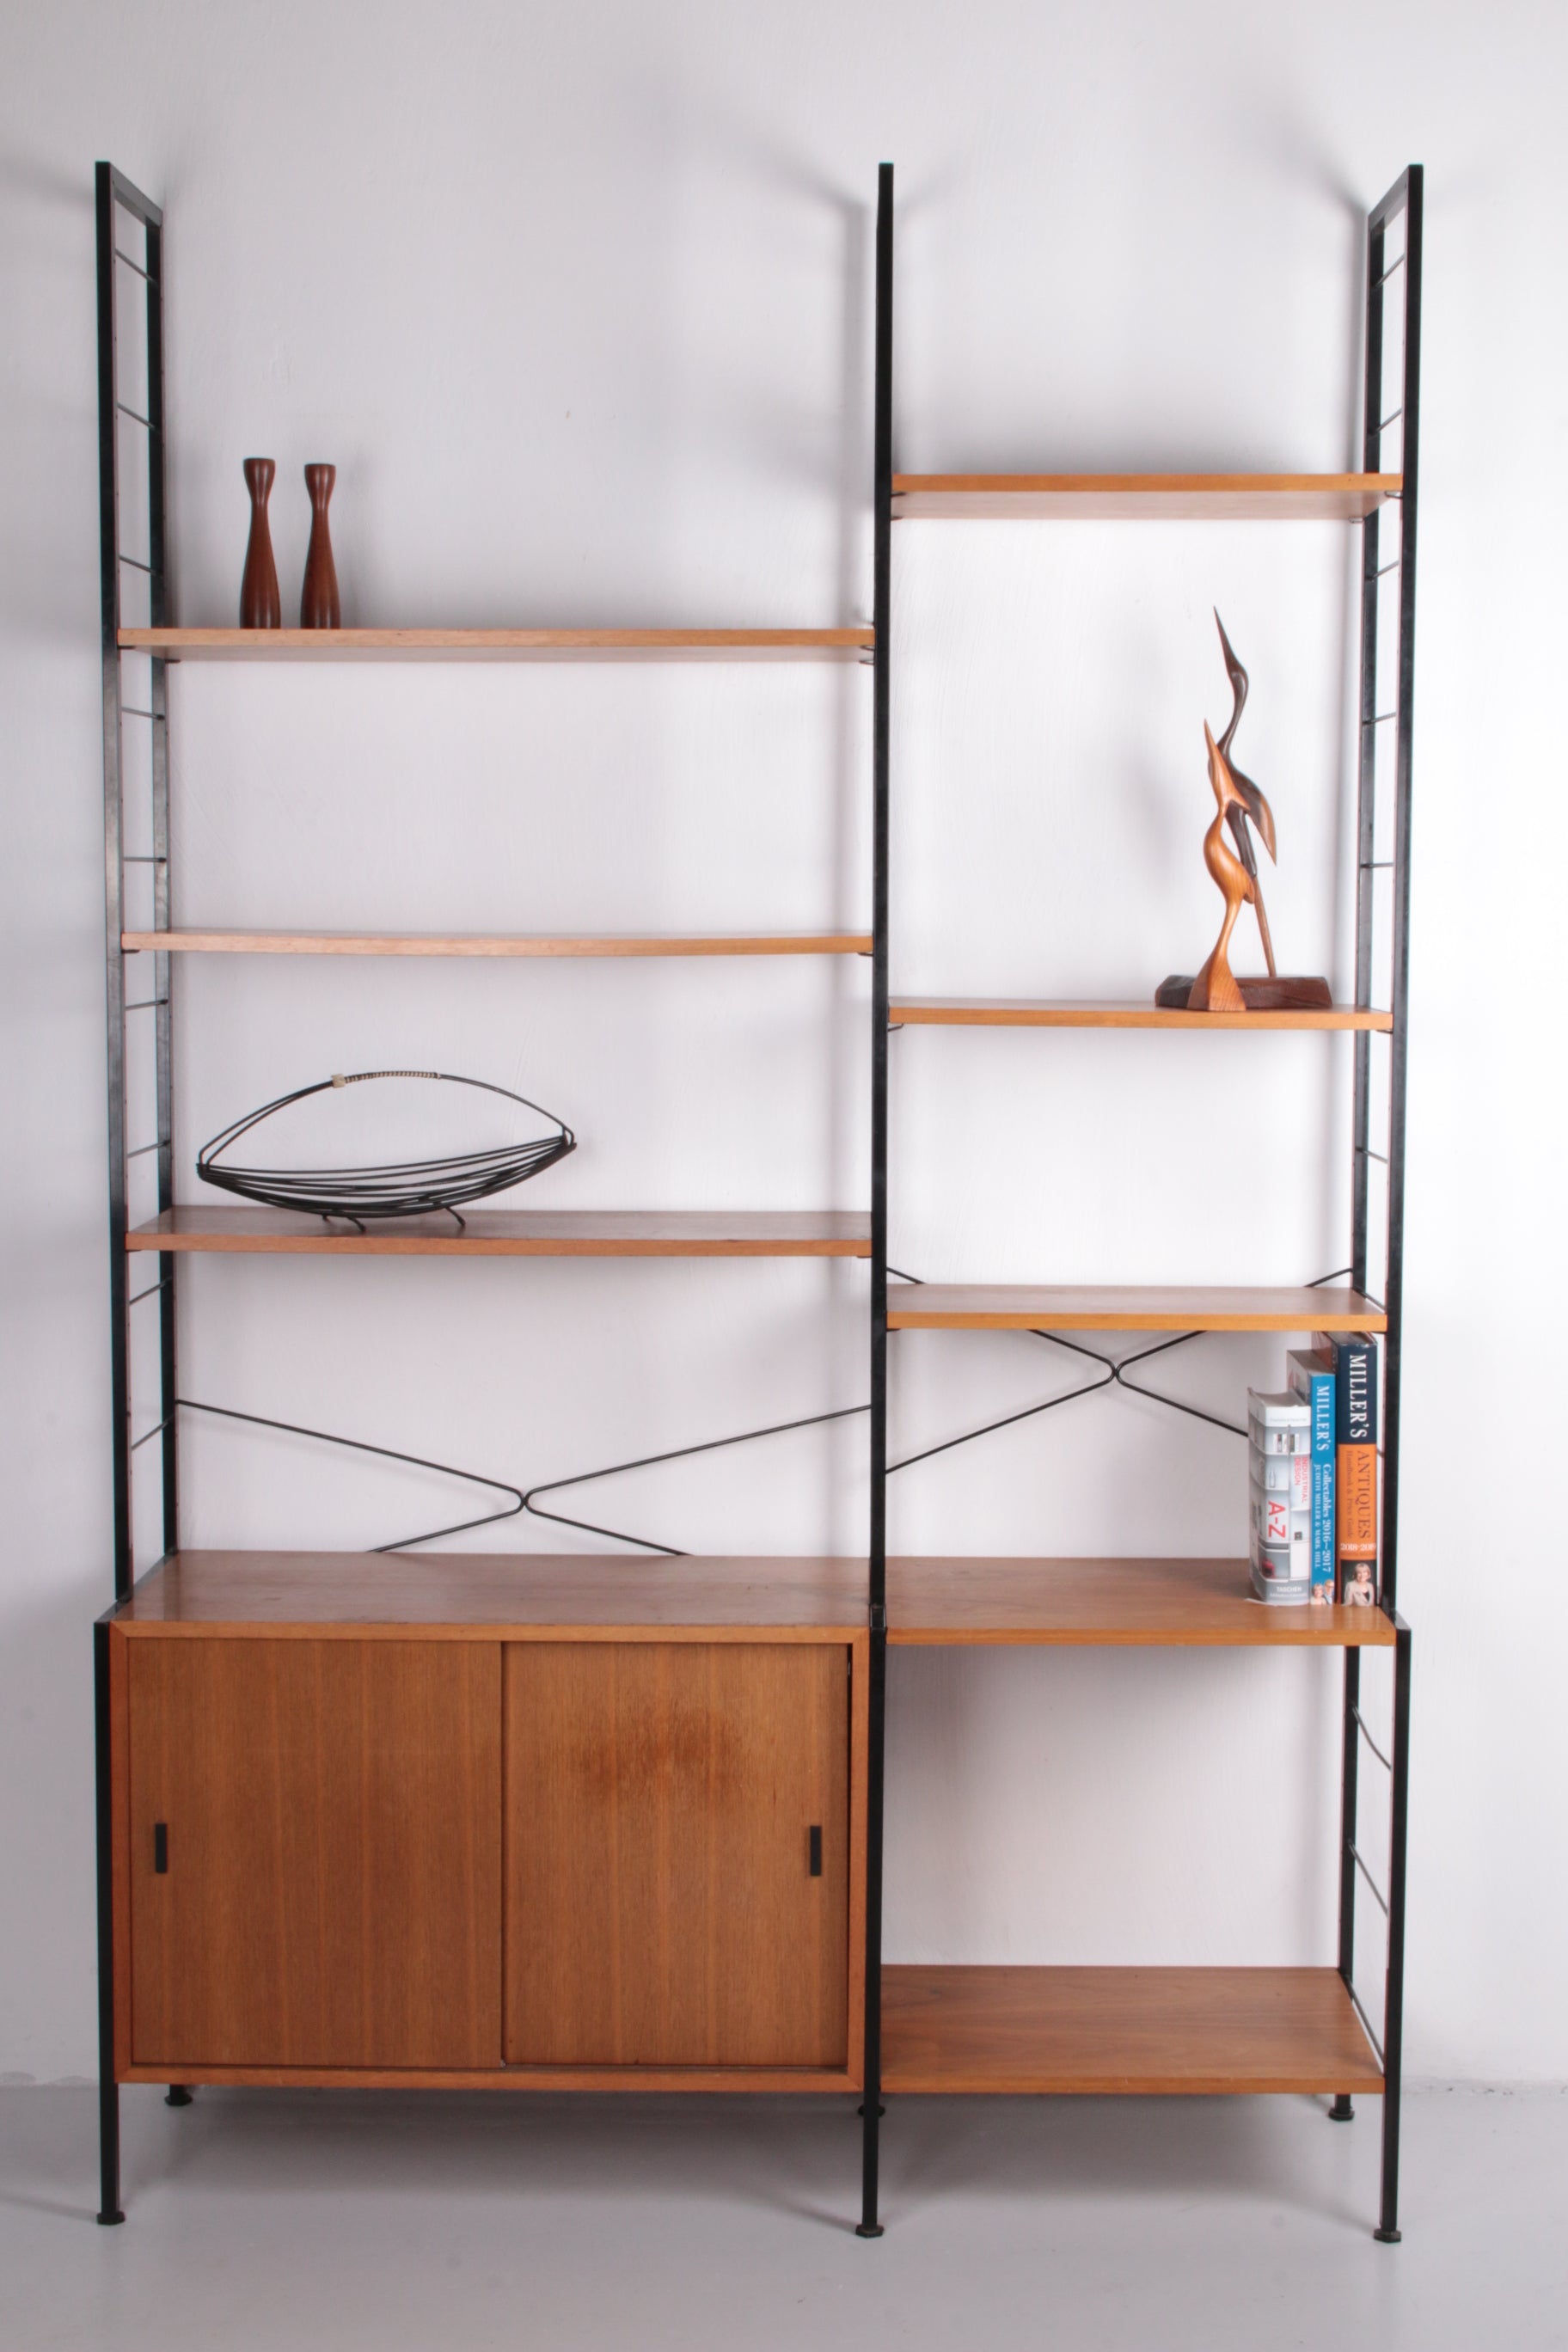 Pat over Onschuldig String Regal Bookcase made in Germany, 1960s – Timeless-Art